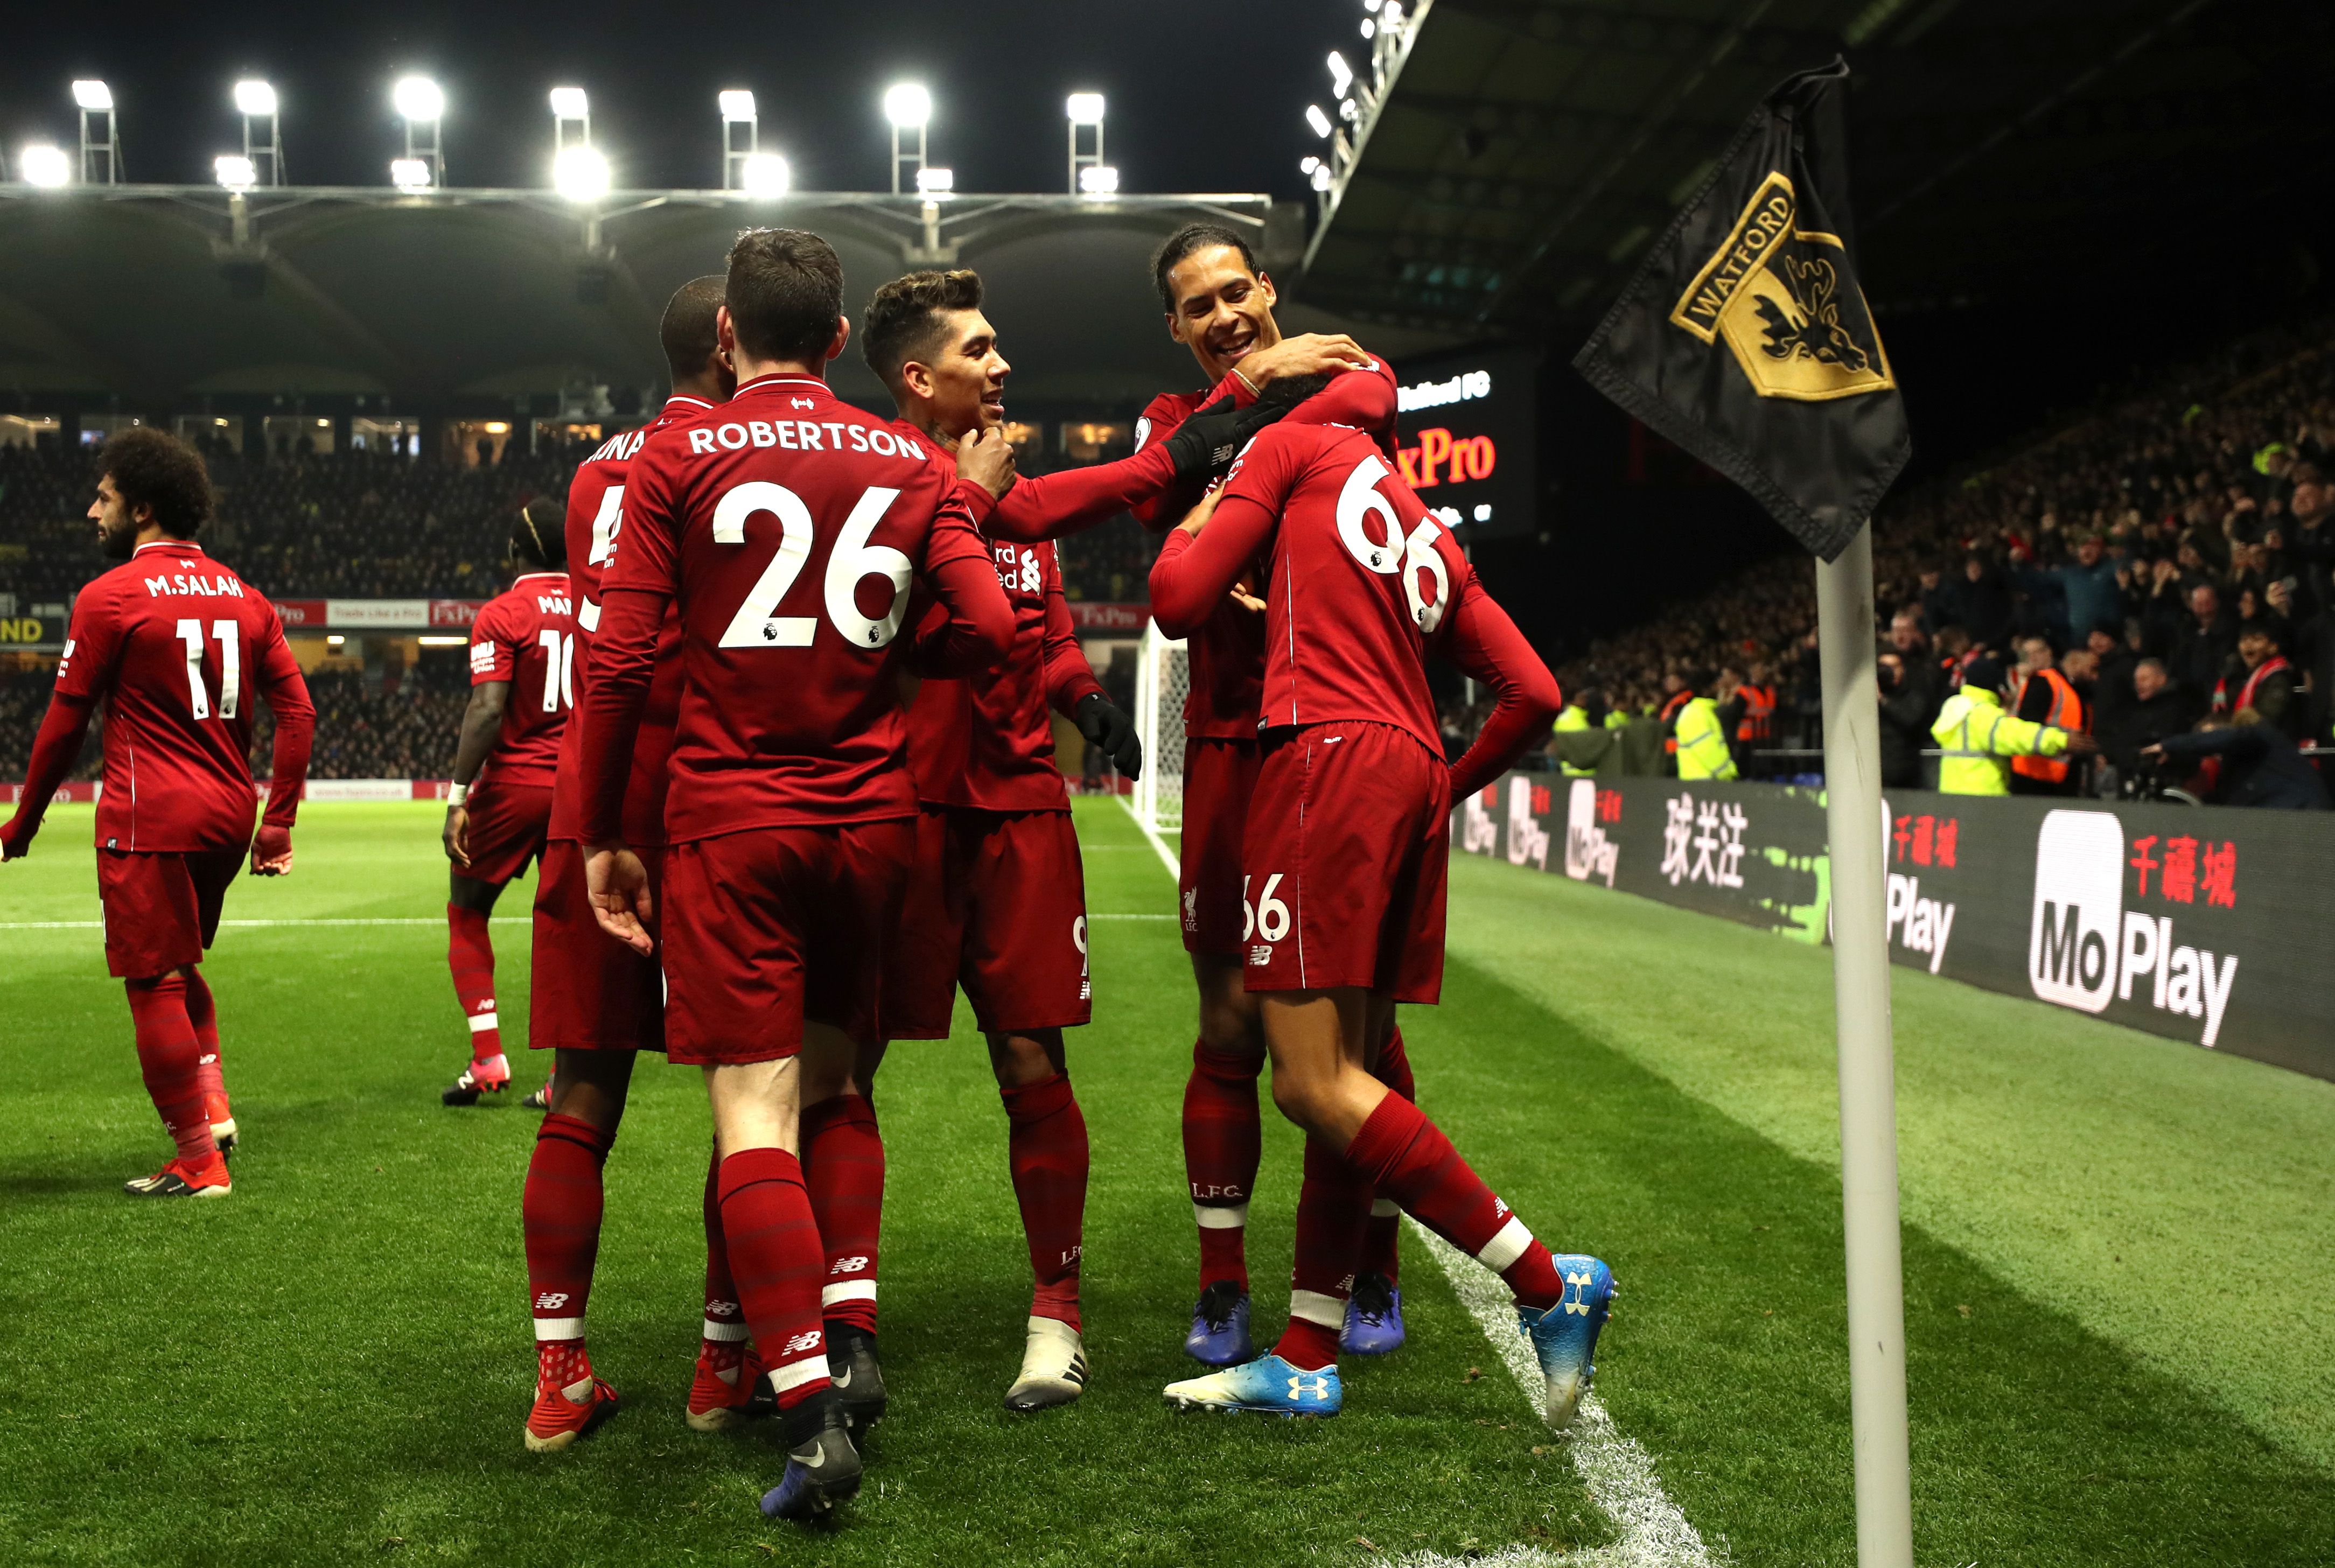 WATFORD, ENGLAND - NOVEMBER 24:  Trent Alexander-Arnold of Liverpool celebrates with teammates after scoring his team's second goal during the Premier League match between Watford FC and Liverpool FC at Vicarage Road on November 24, 2018 in Watford, United Kingdom.  (Photo by Richard Heathcote/Getty Images)